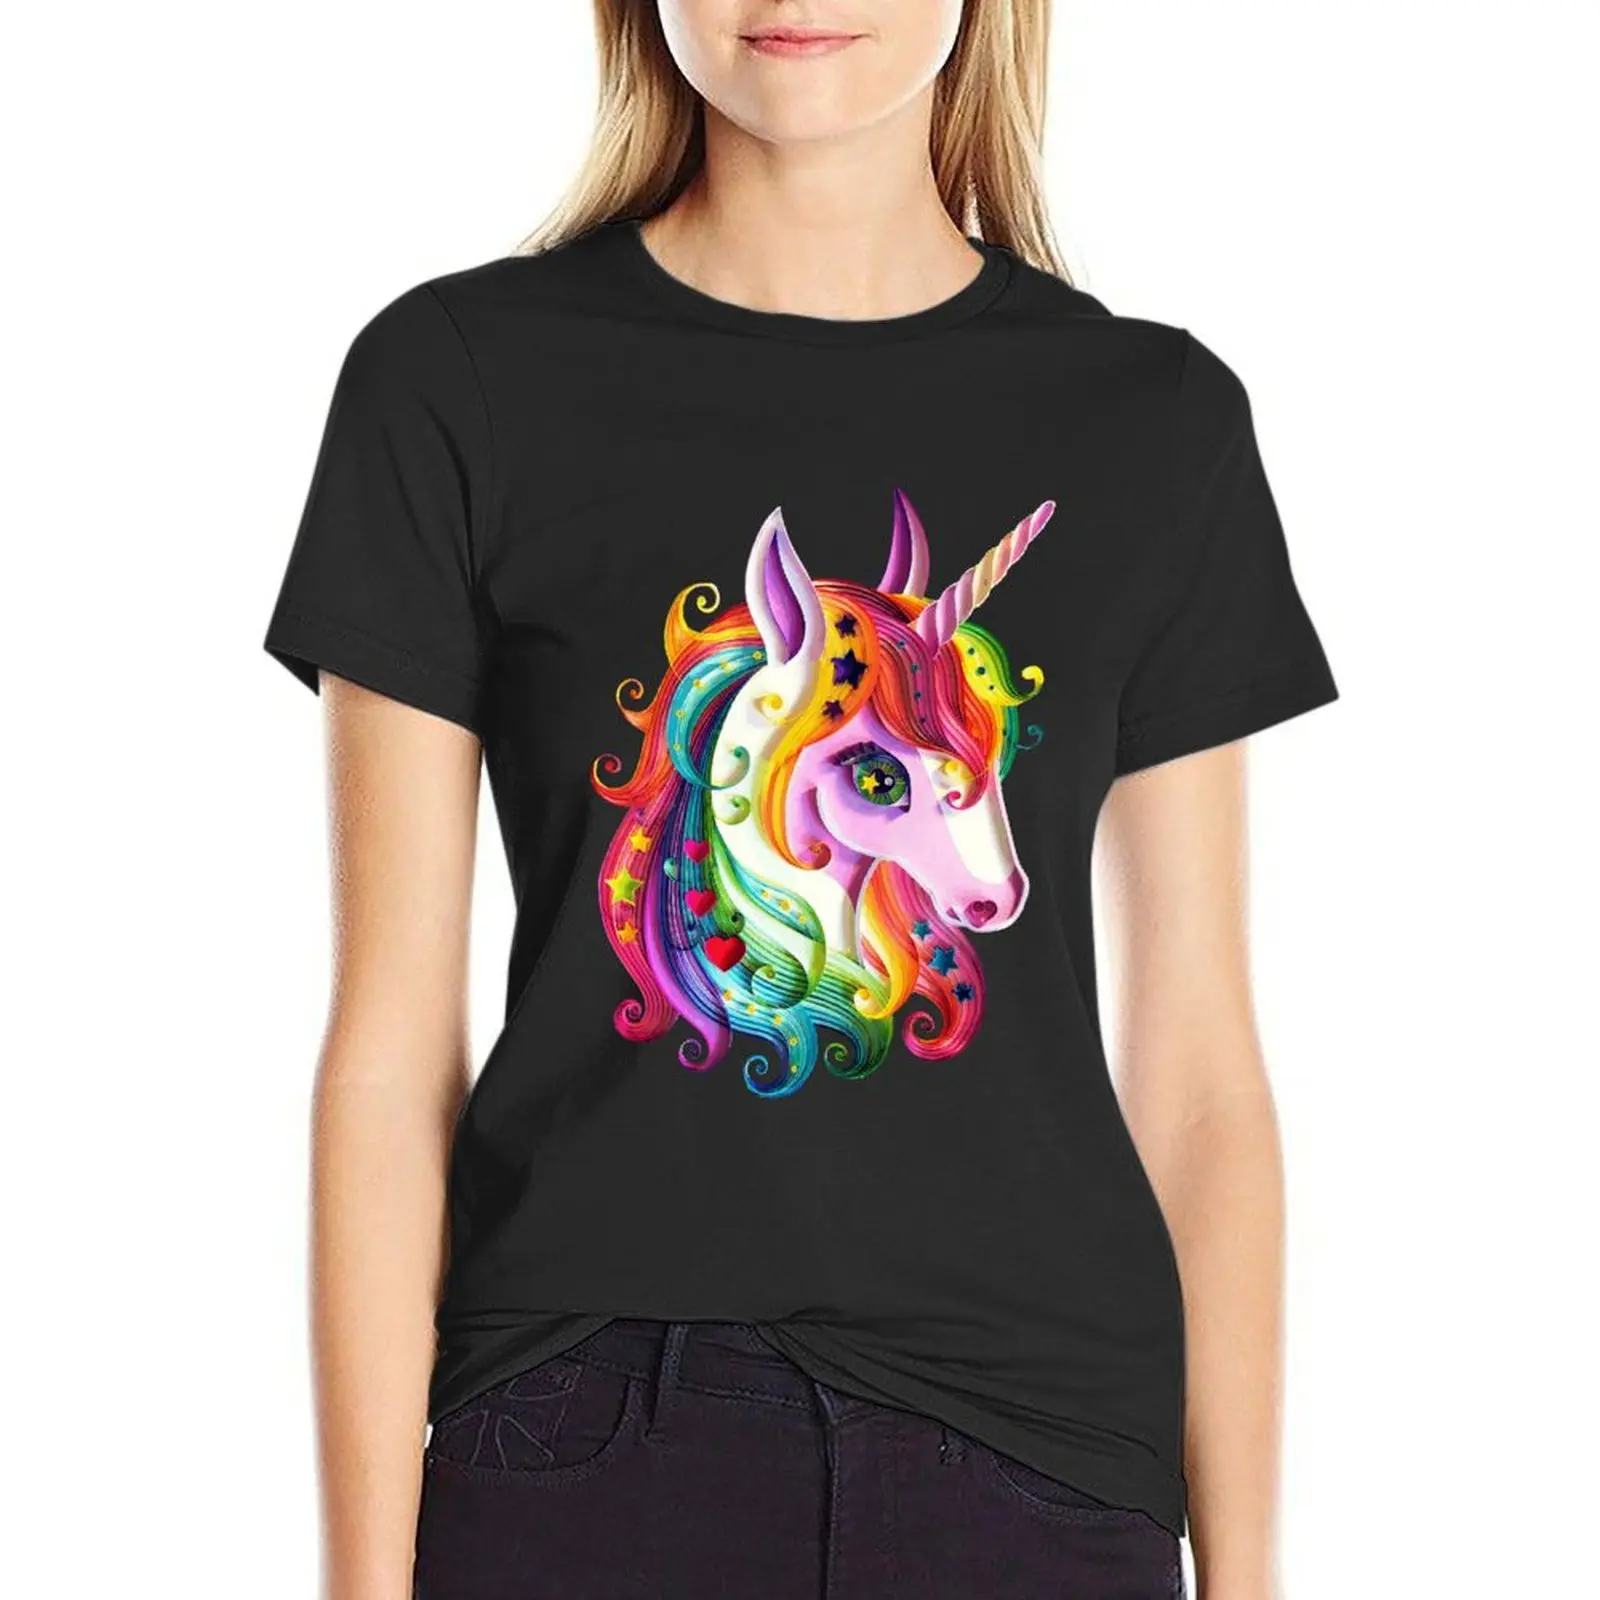 

Unicorn of colored ribbons T-shirt lady clothes Female clothing animal print shirt for girls cotton t shirts Women